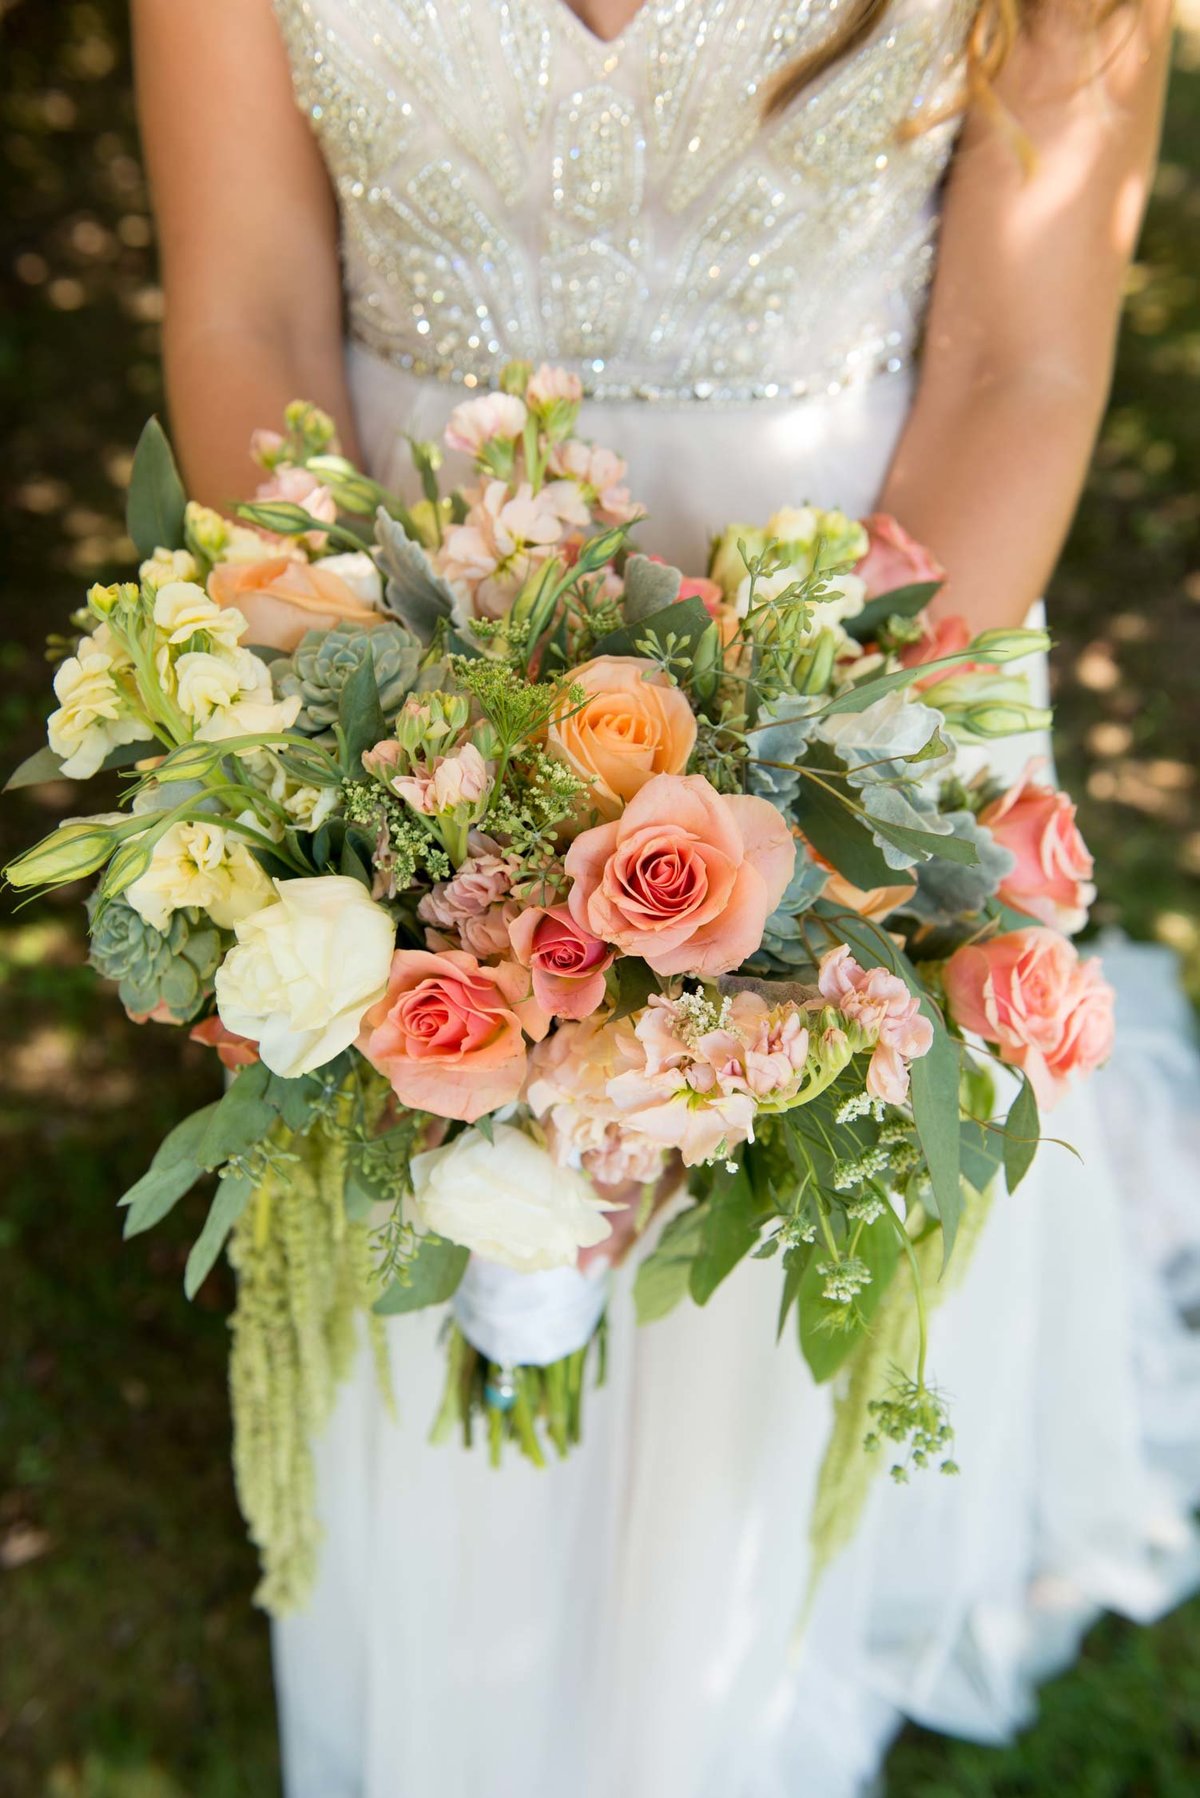 Bride's dress and bouquet at Flowerfield